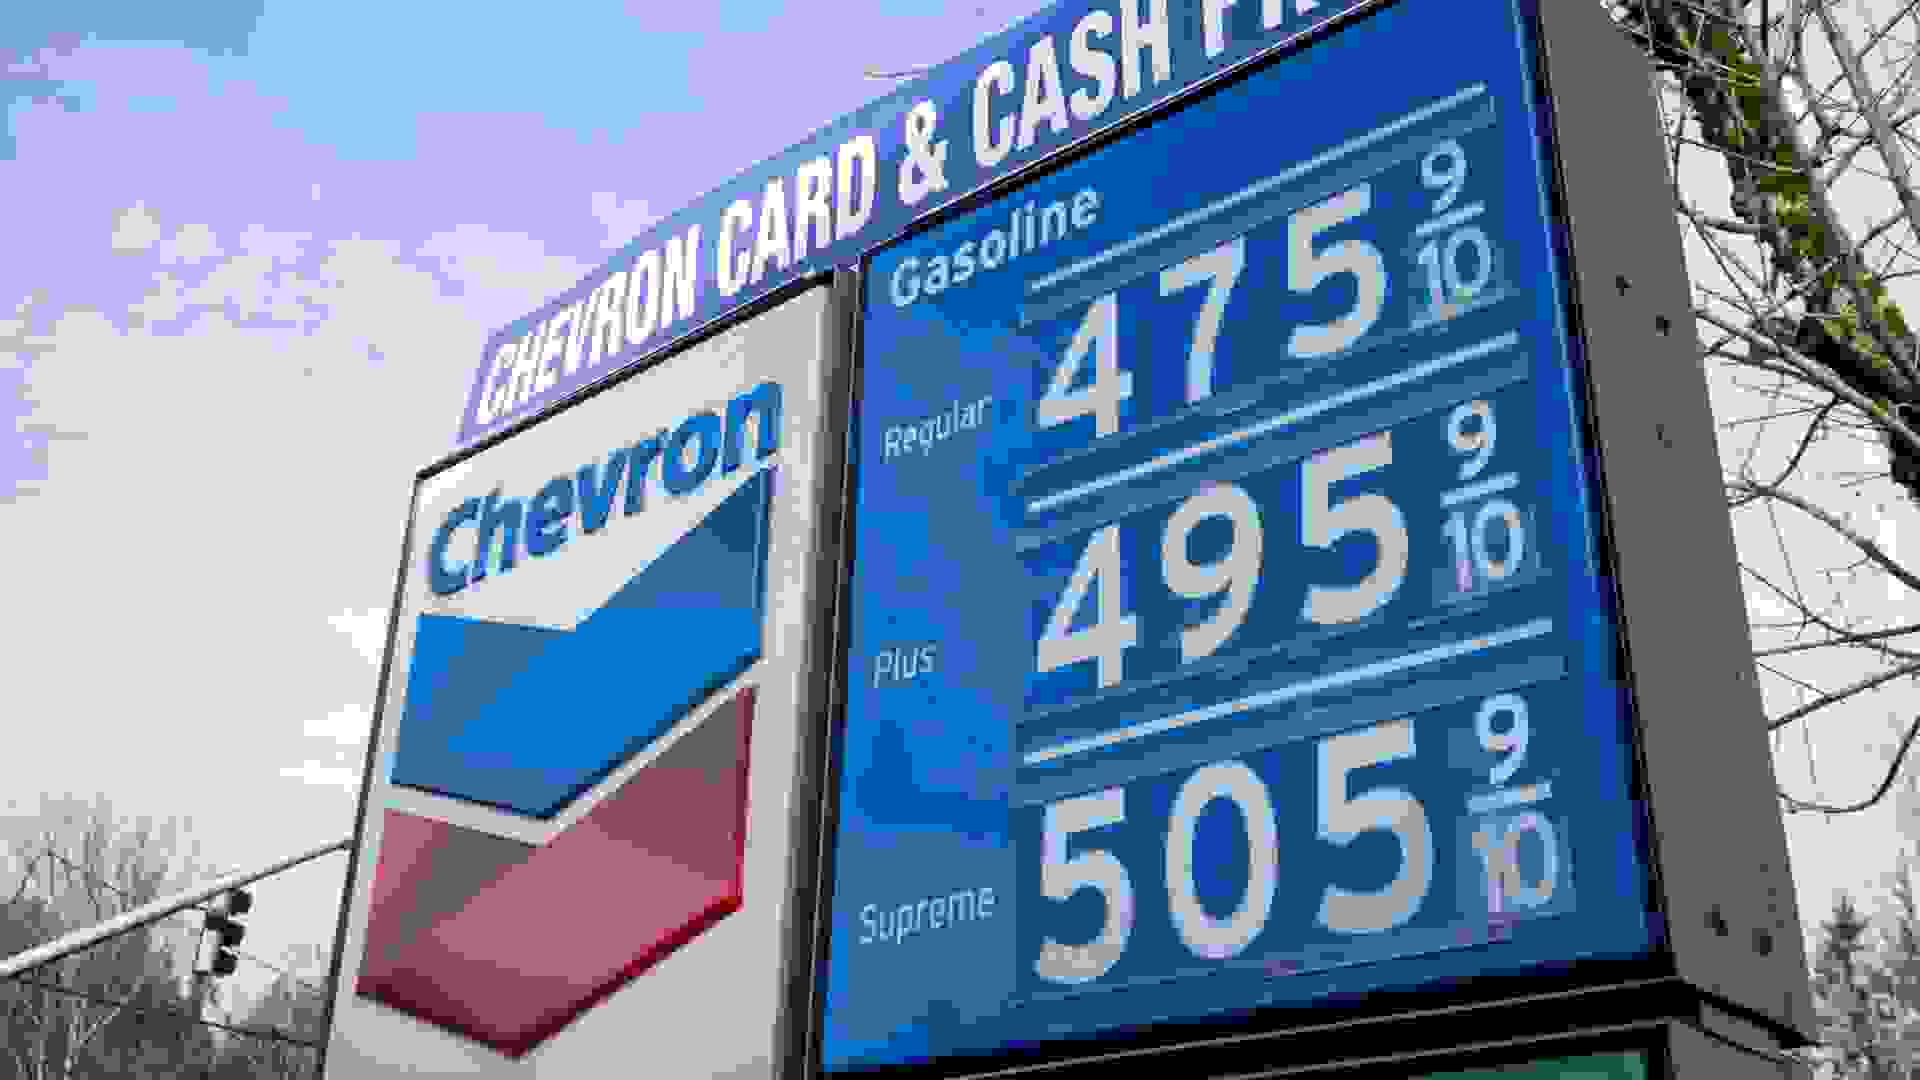 West Linn, OR, USA - Mar 11, 2022: The gas price sign at a Chevron gas station in West Linn, Oregon.